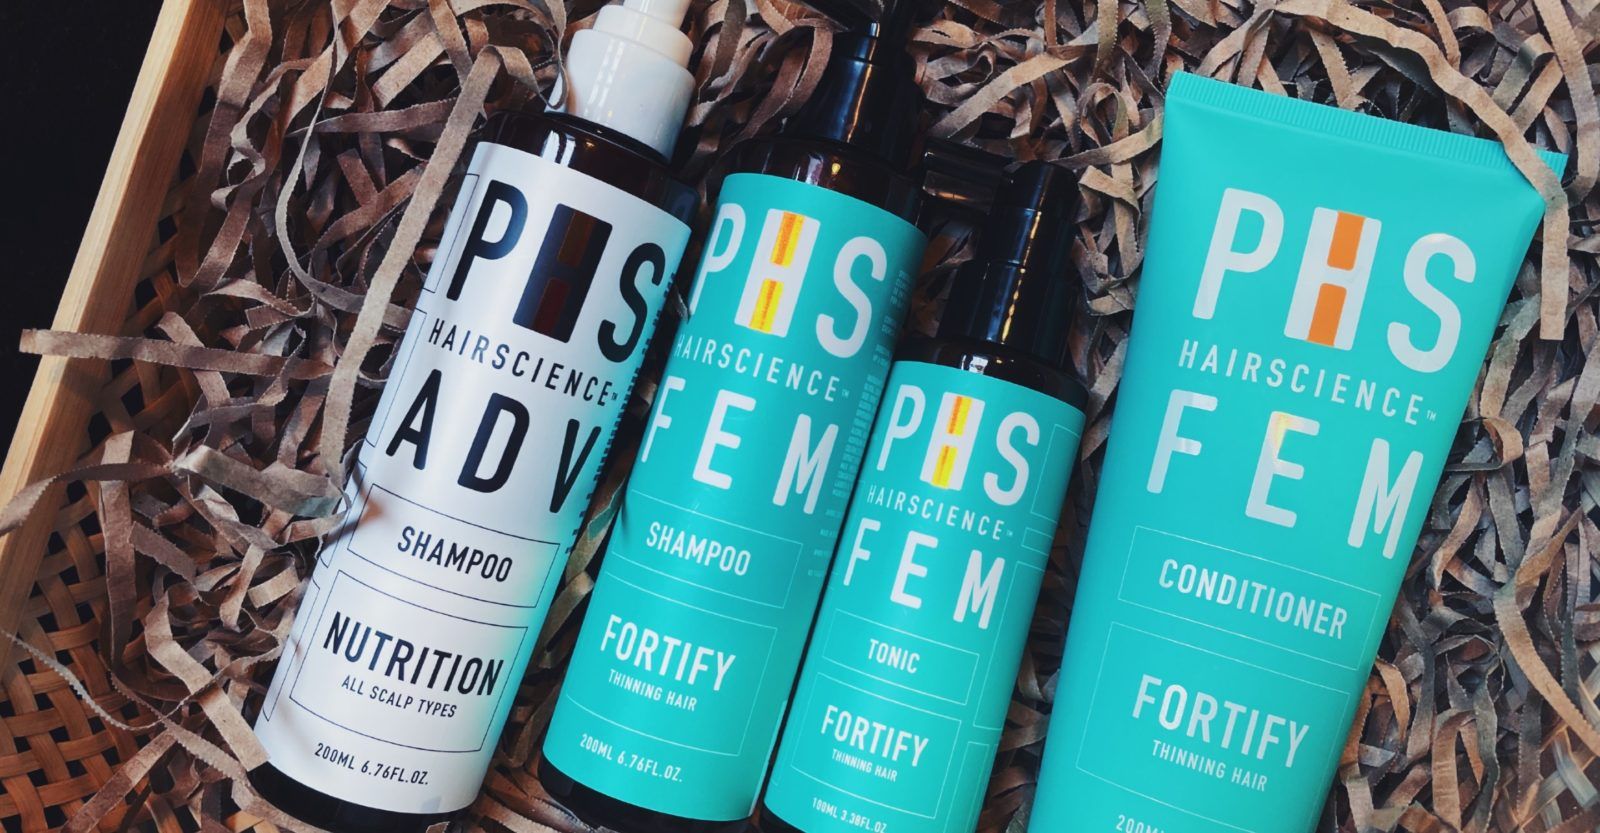 Review: Can this three-step regime from PHS HAIRSCIENCE bring my mane back to its former glory?